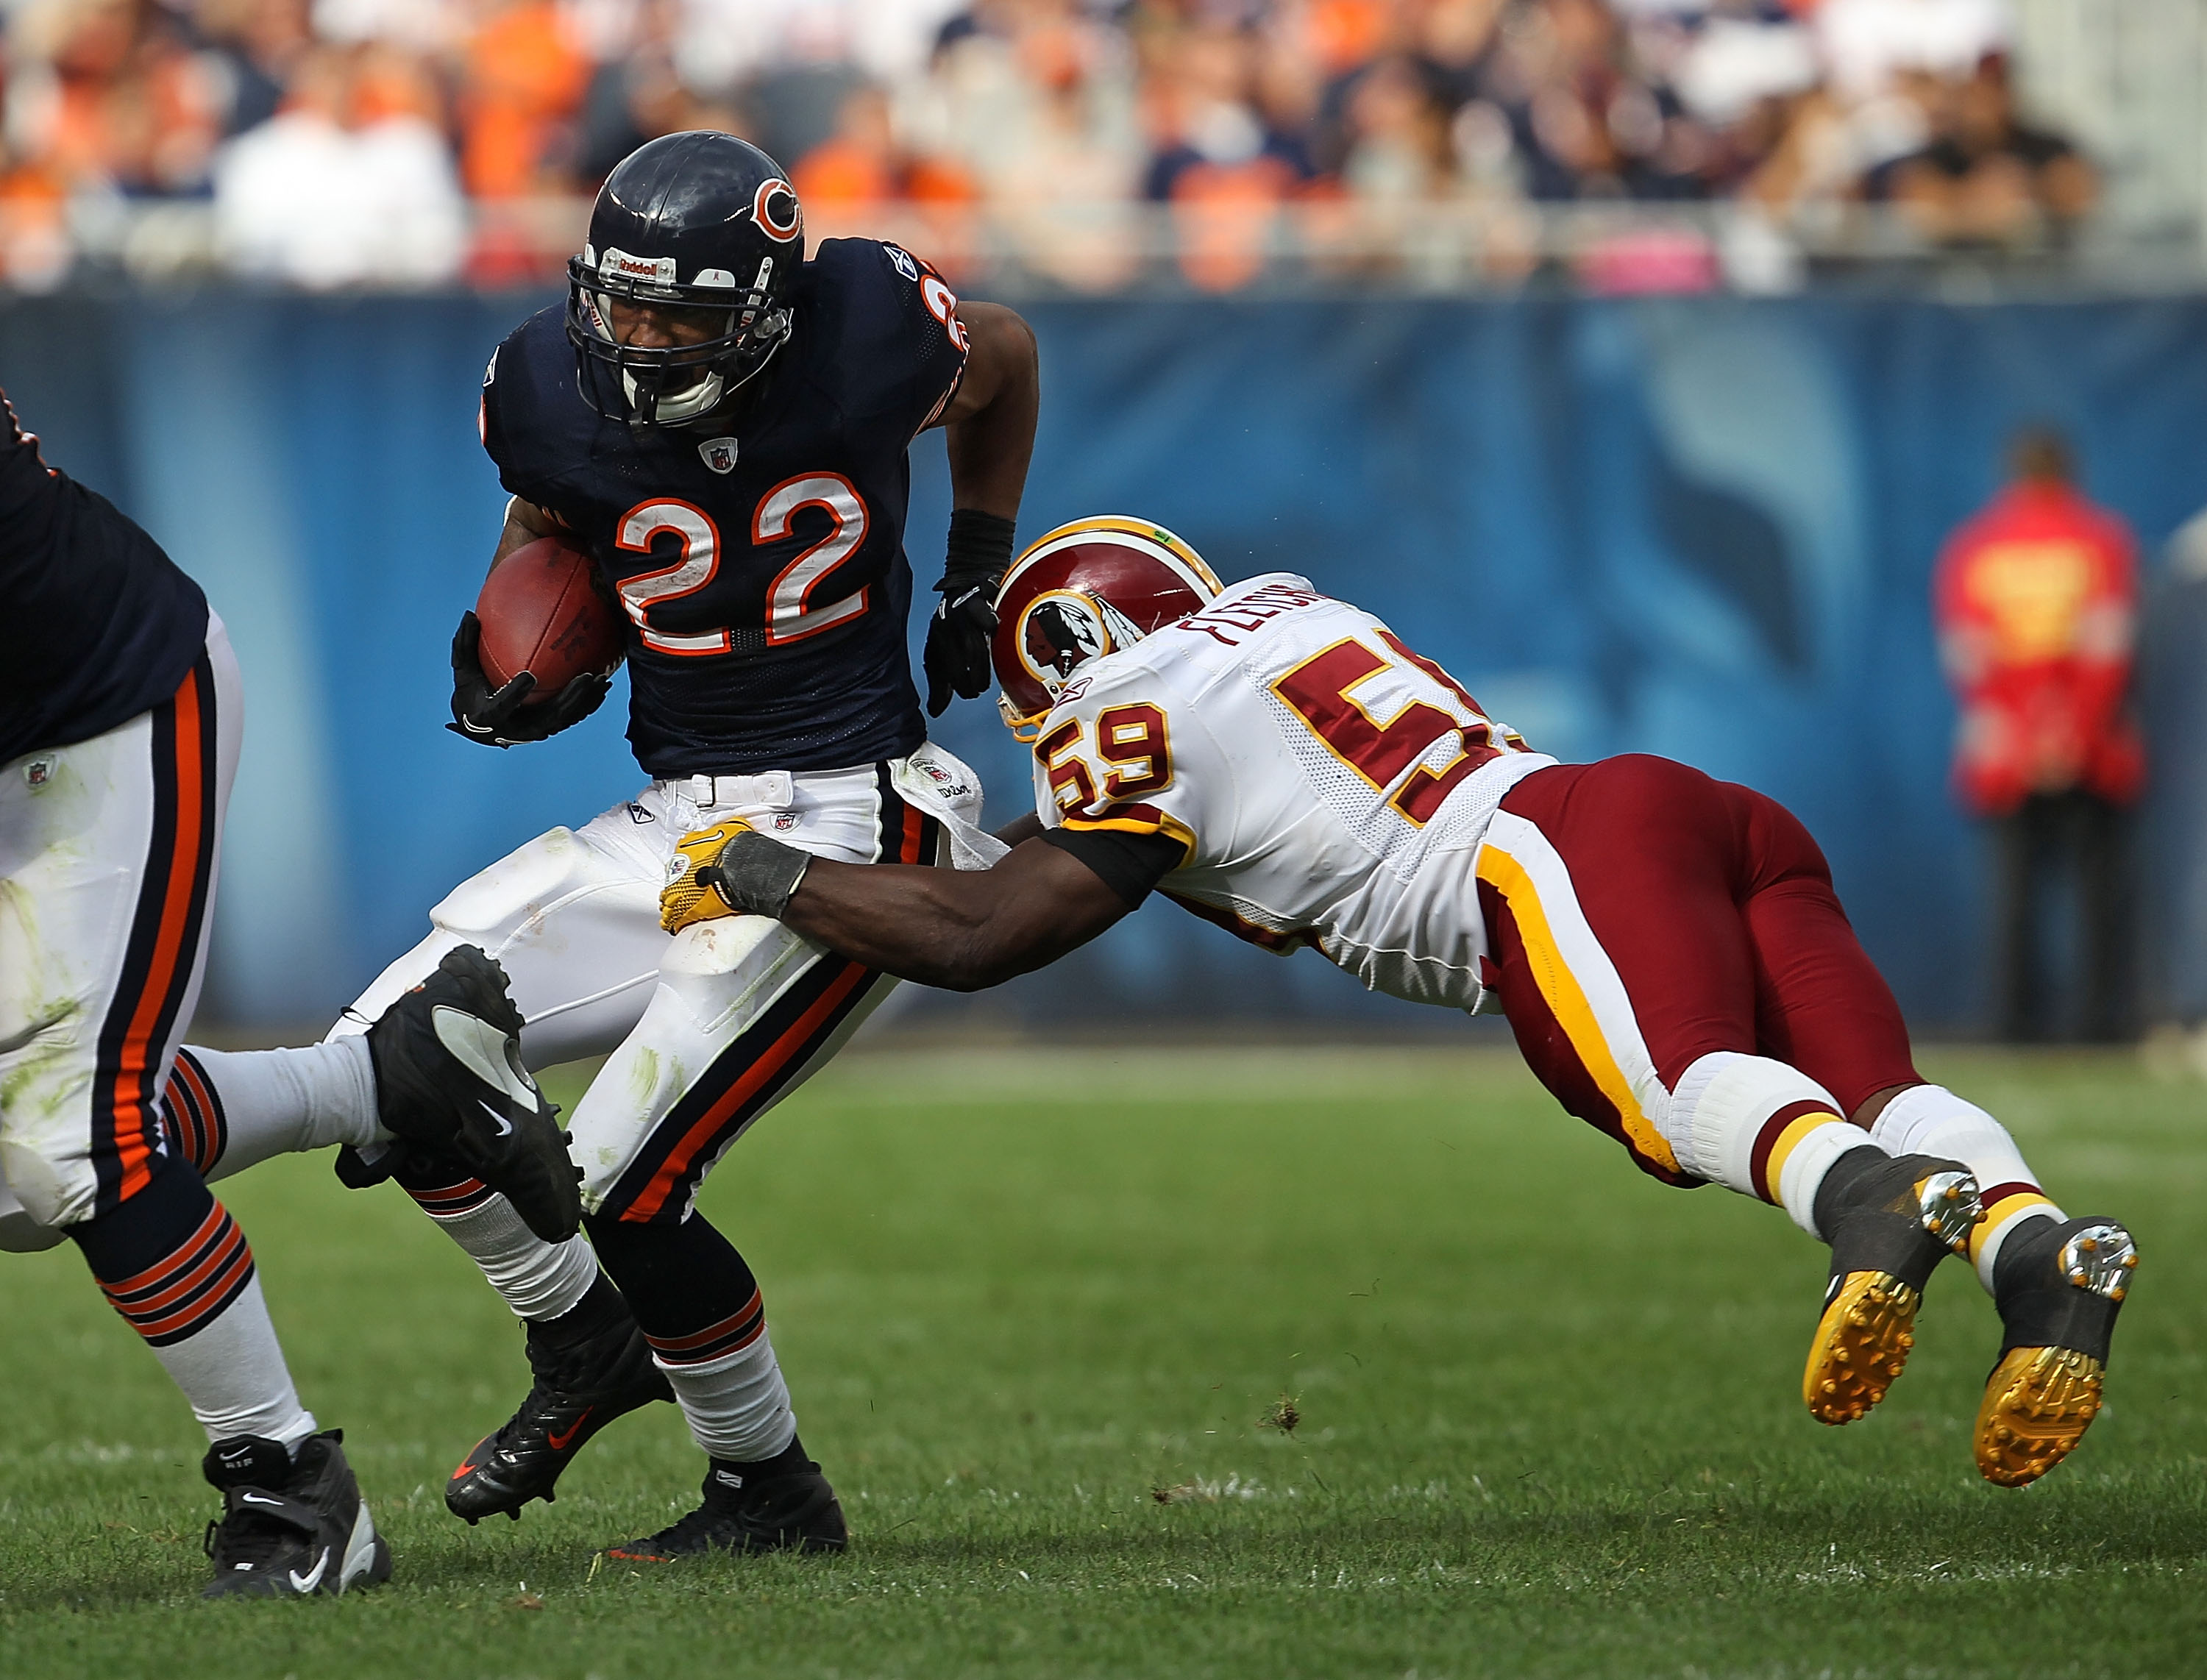 CHICAGO - OCTOBER 24: Matt Forte #22 of the Chicago Bears avoids a tackle attempt by London Fletcher #59 of the Washington Redskins at Soldier Field on October 24, 2010 in Chicago, Illinois. The Redskins defeated the Bears 17-14. (Photo by Jonathan Daniel